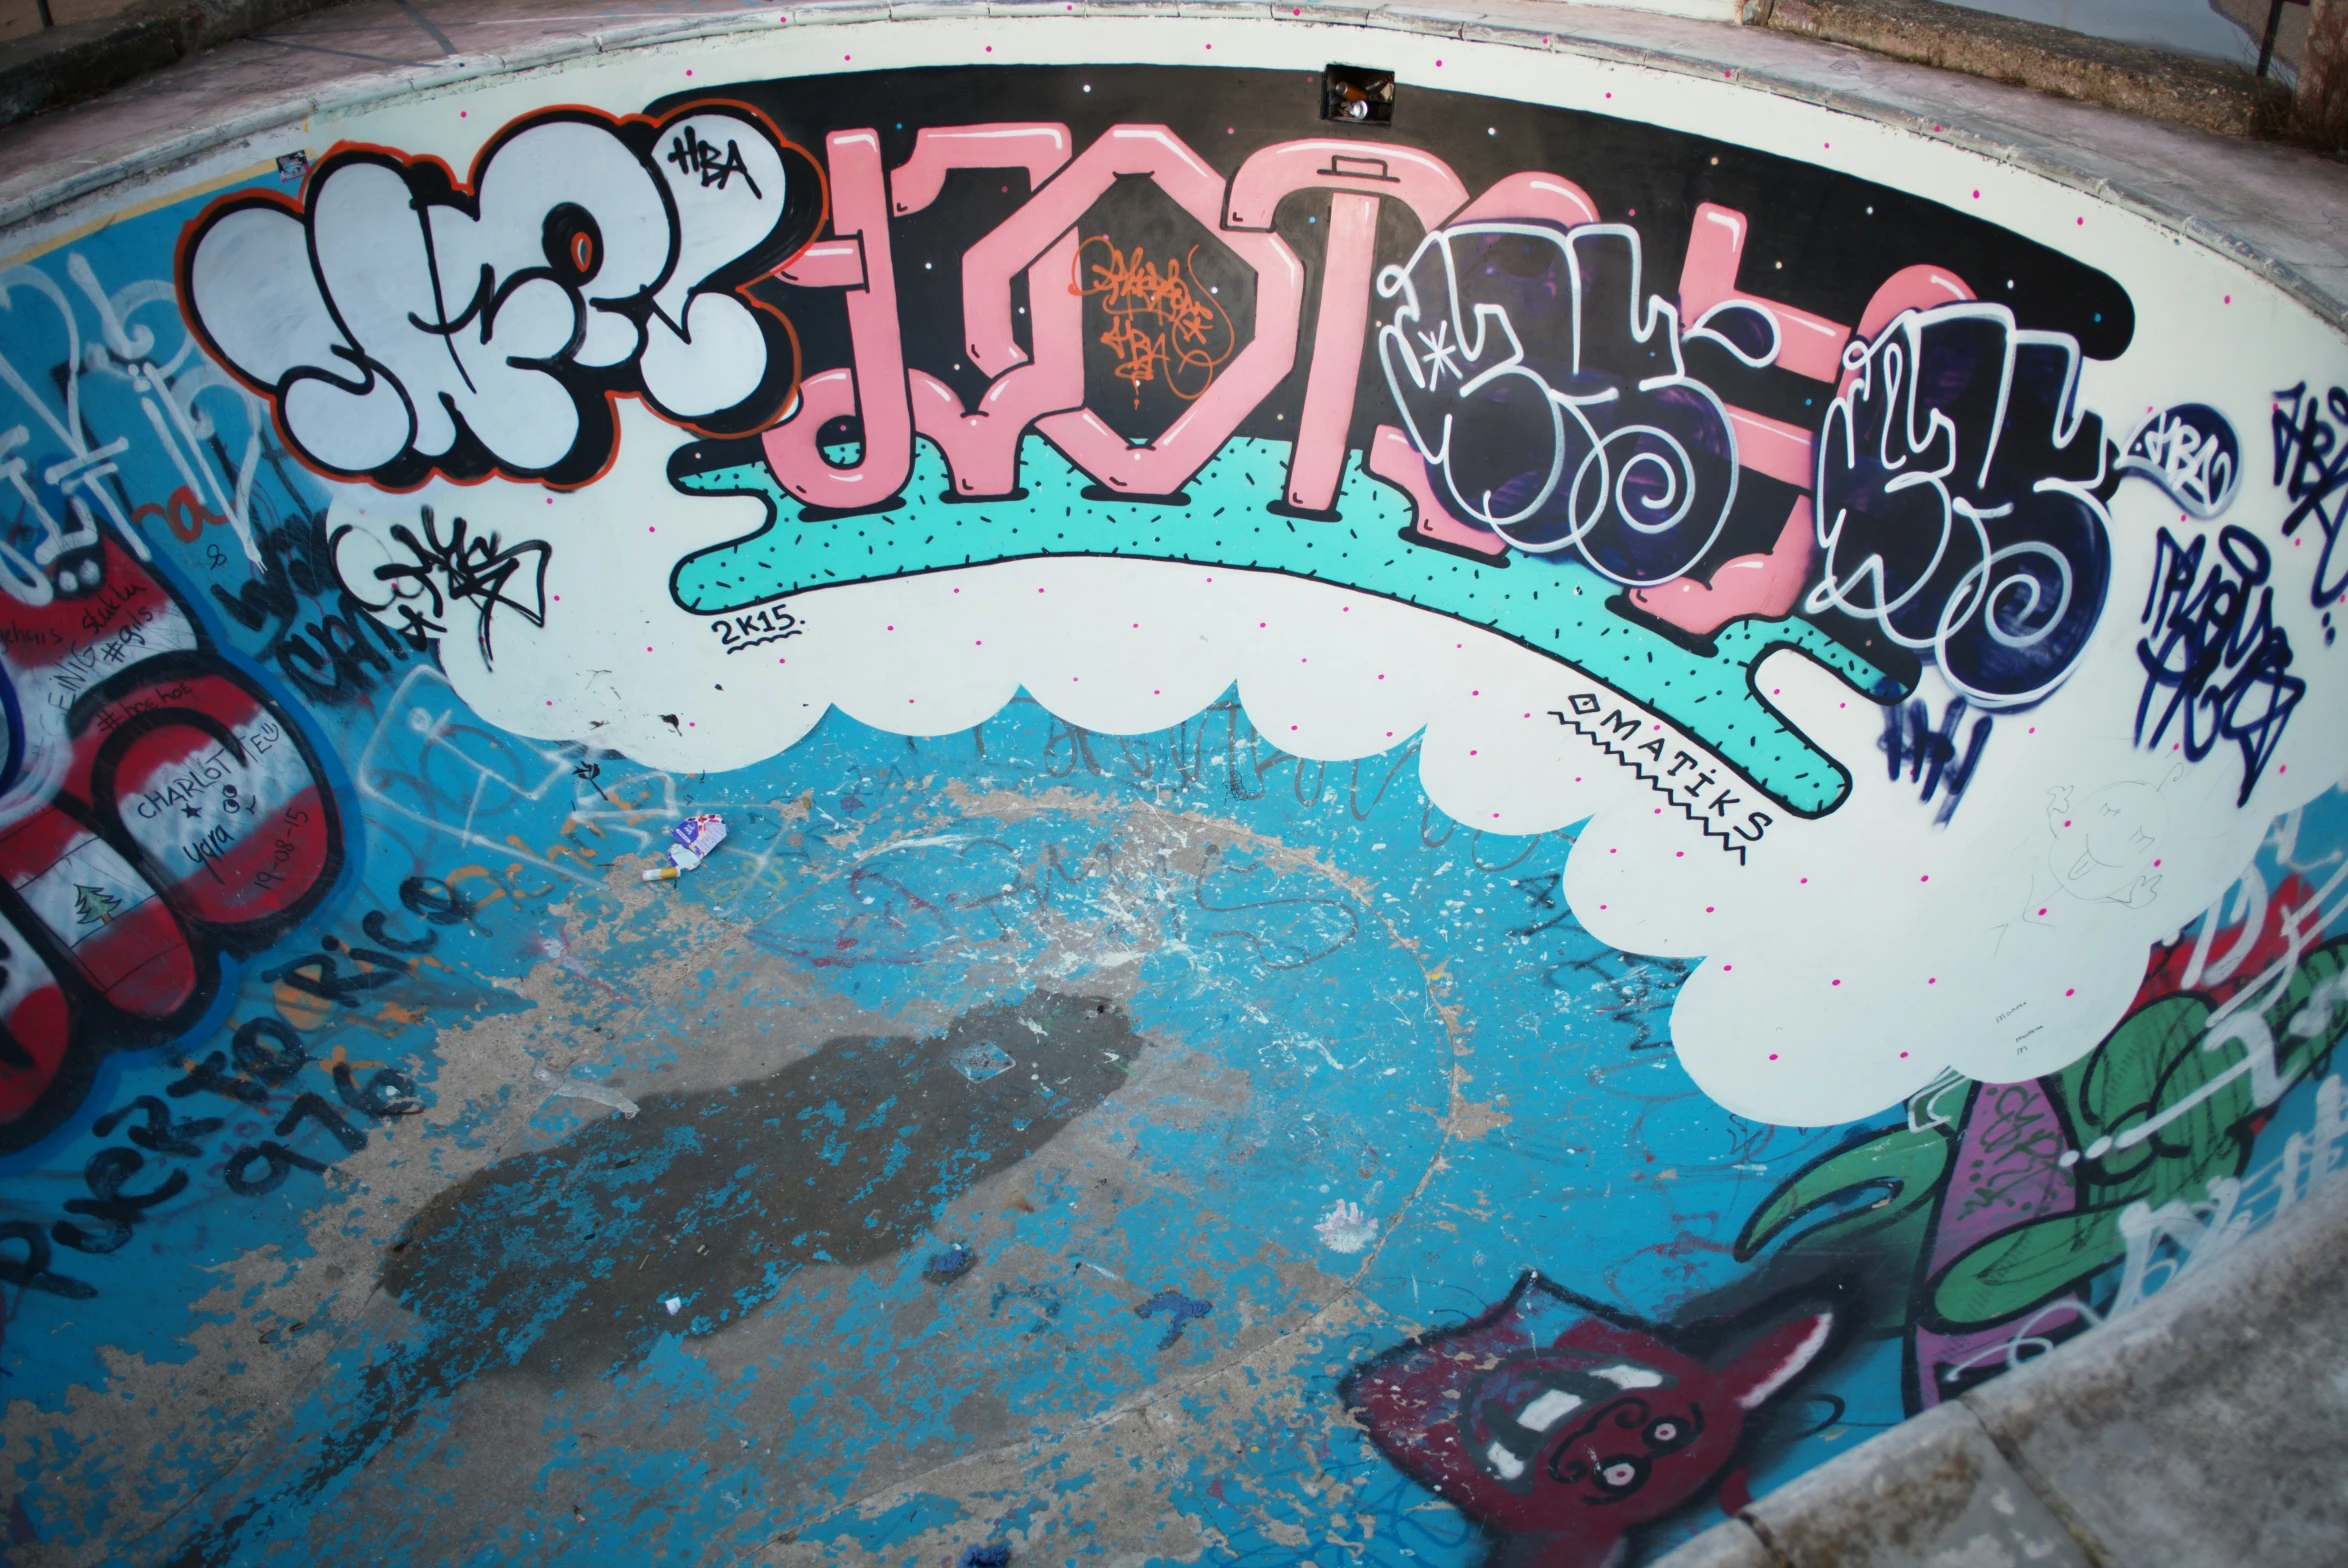 the back wall of a skateboard park with graffiti